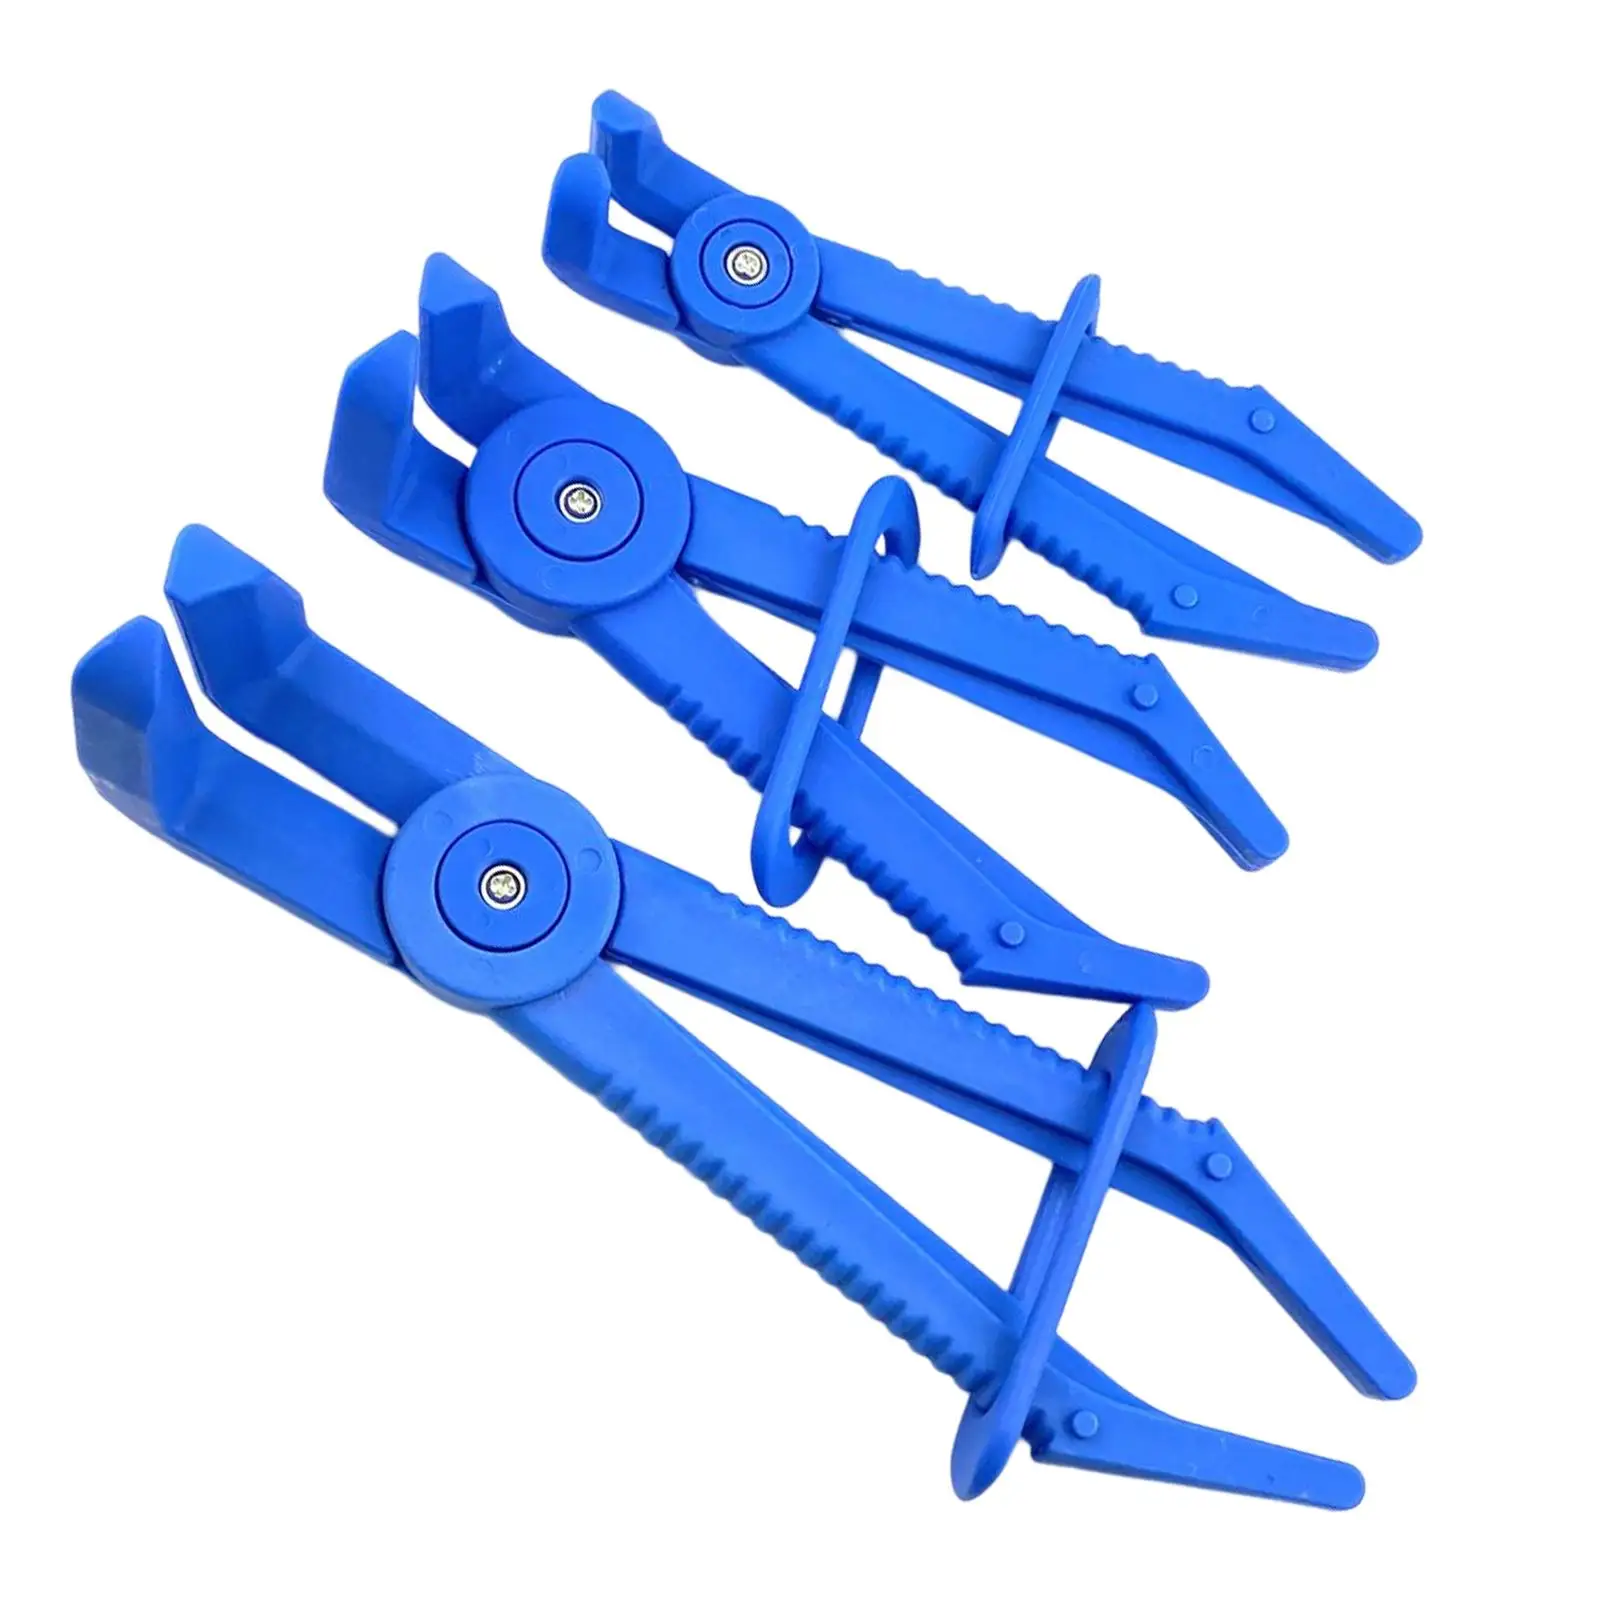 3 Pieces Fuel Water Line Hose Pliers Clamp Sealing Clamps Kit for Hose Removal Hook Set